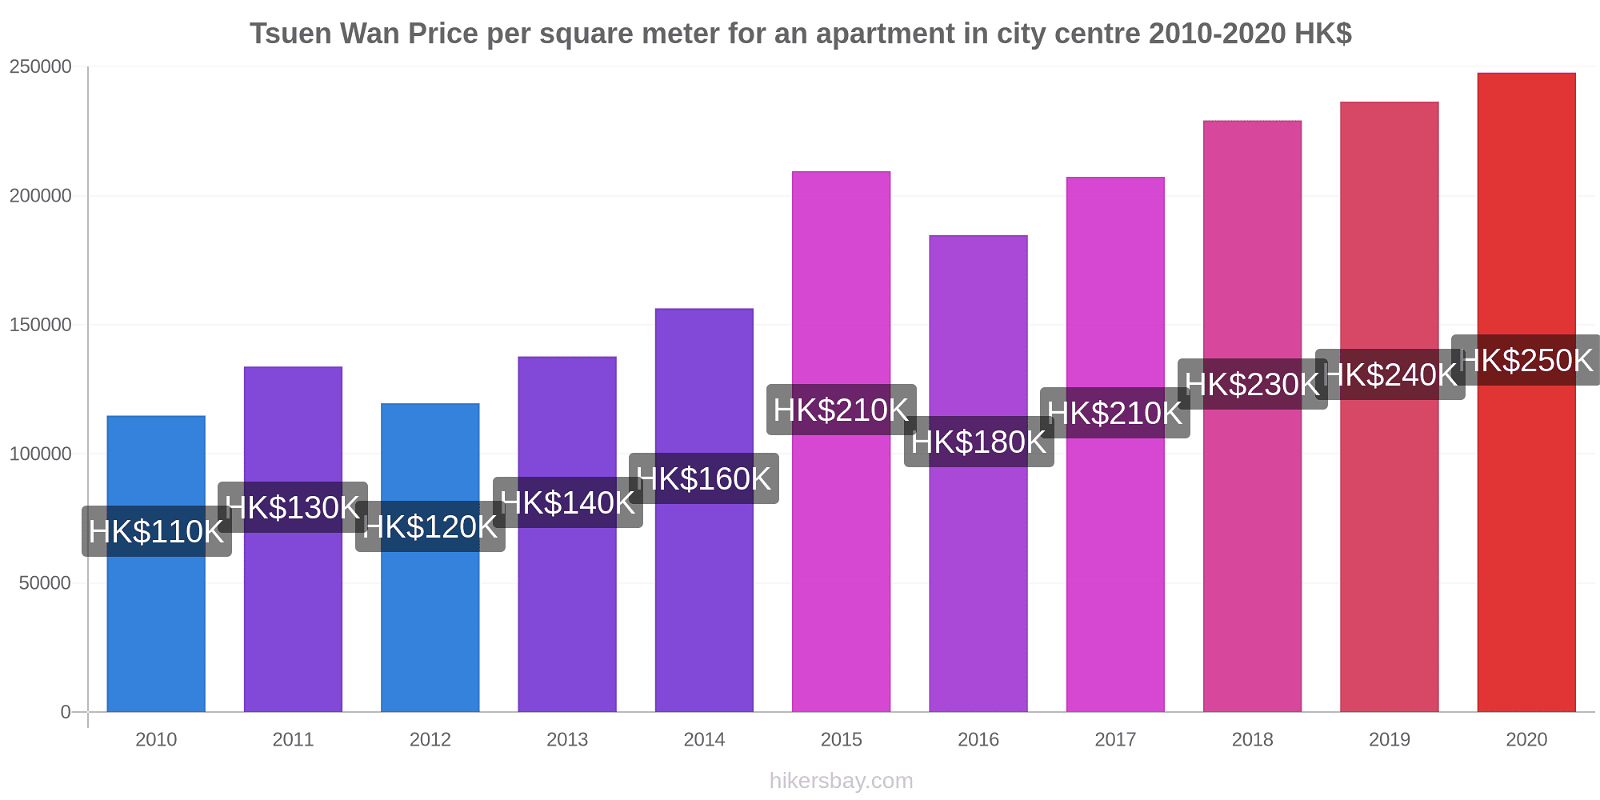 Tsuen Wan price changes Price per square meter for an apartment in city centre hikersbay.com